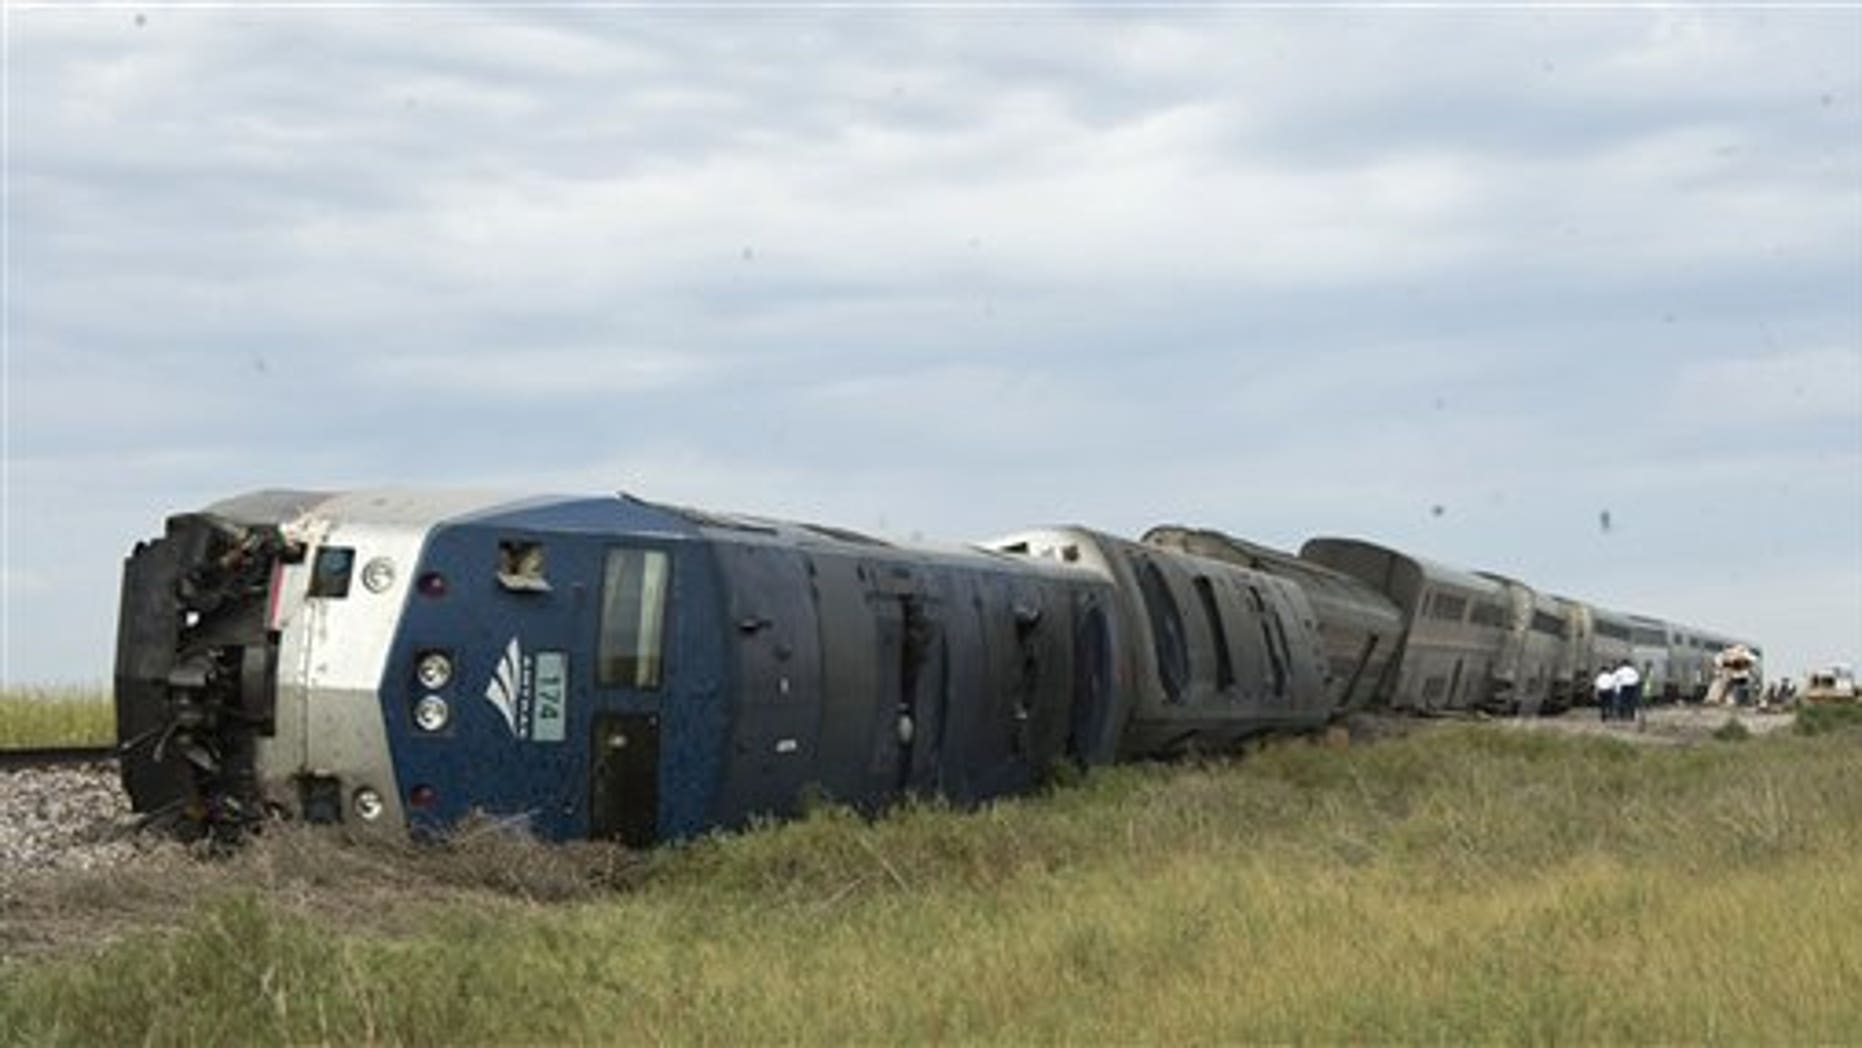 Amtrak Says Train Carrying About 175 Passengers Derailed in Nebraska